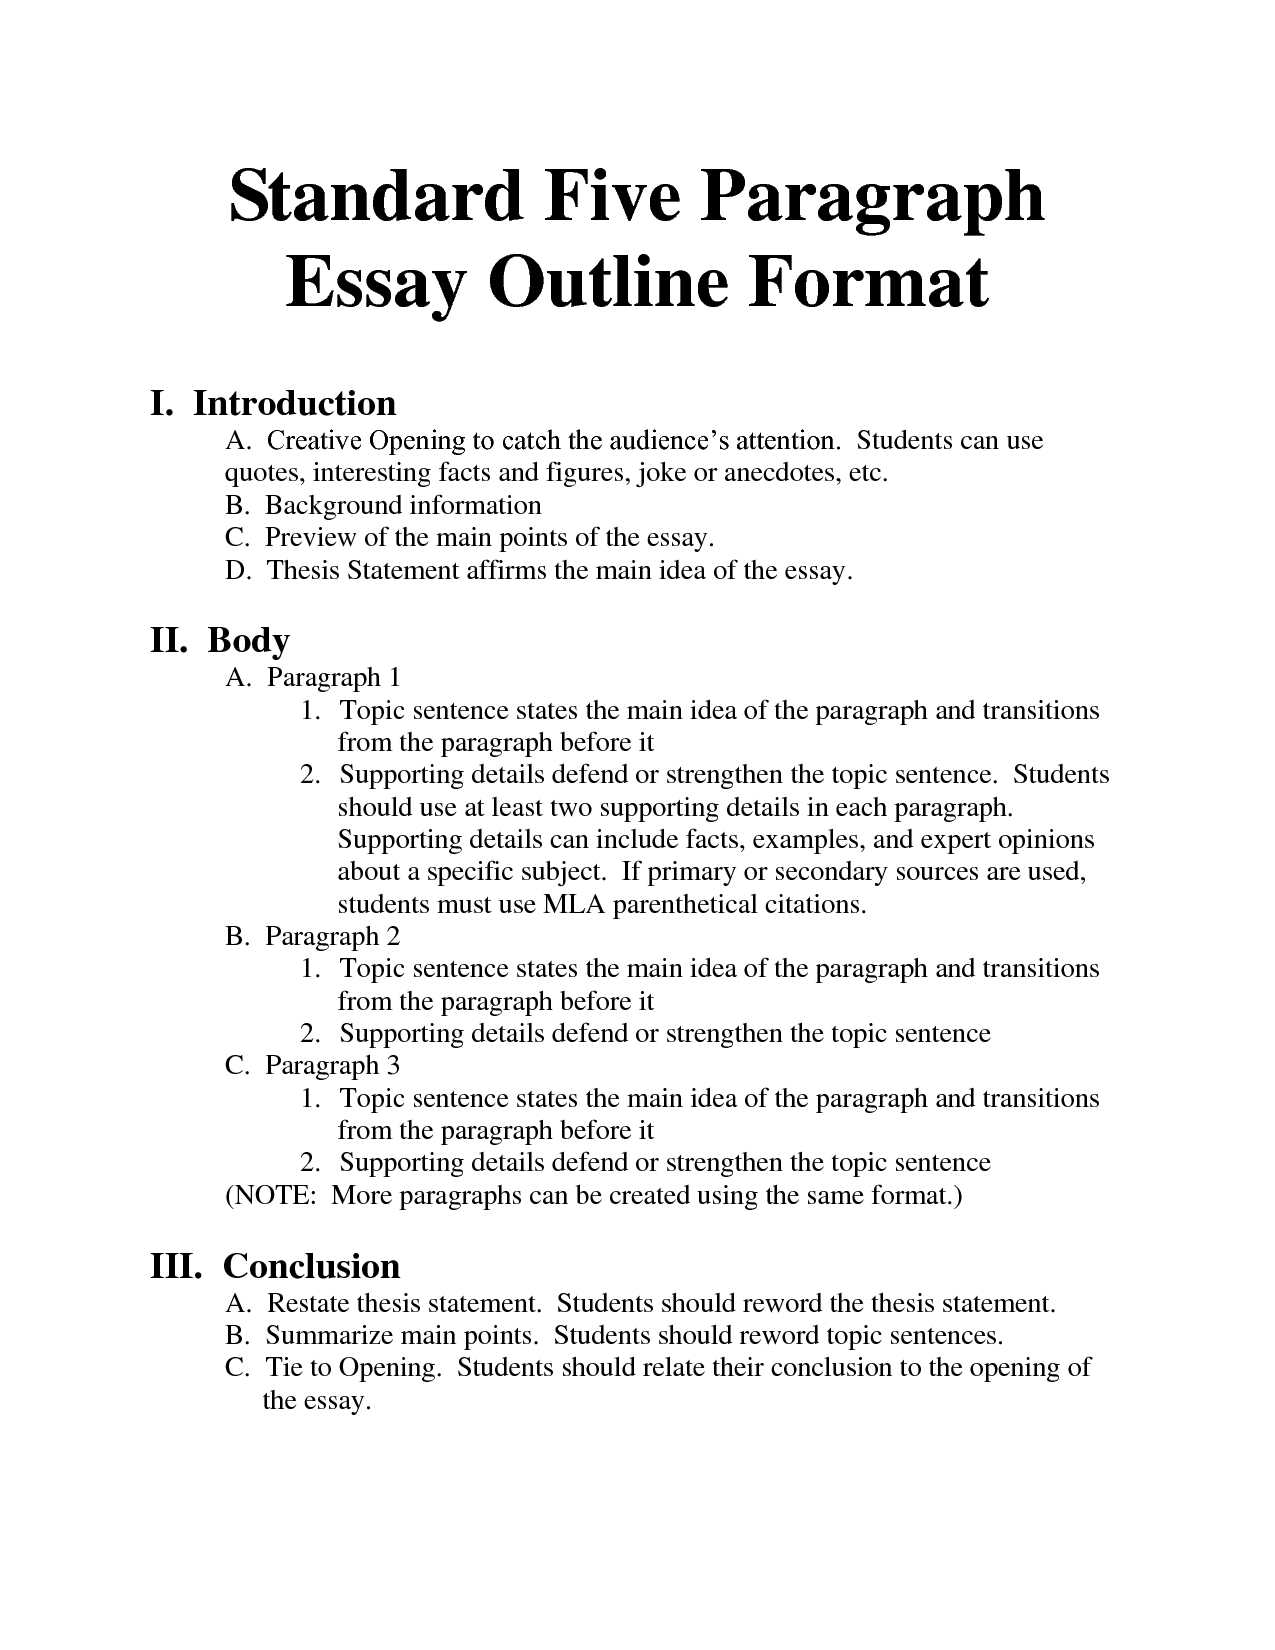 Bowling for Columbine Worksheet Answers Along with Type A Essay Standard Essay format Bing Images Essays Homeschool